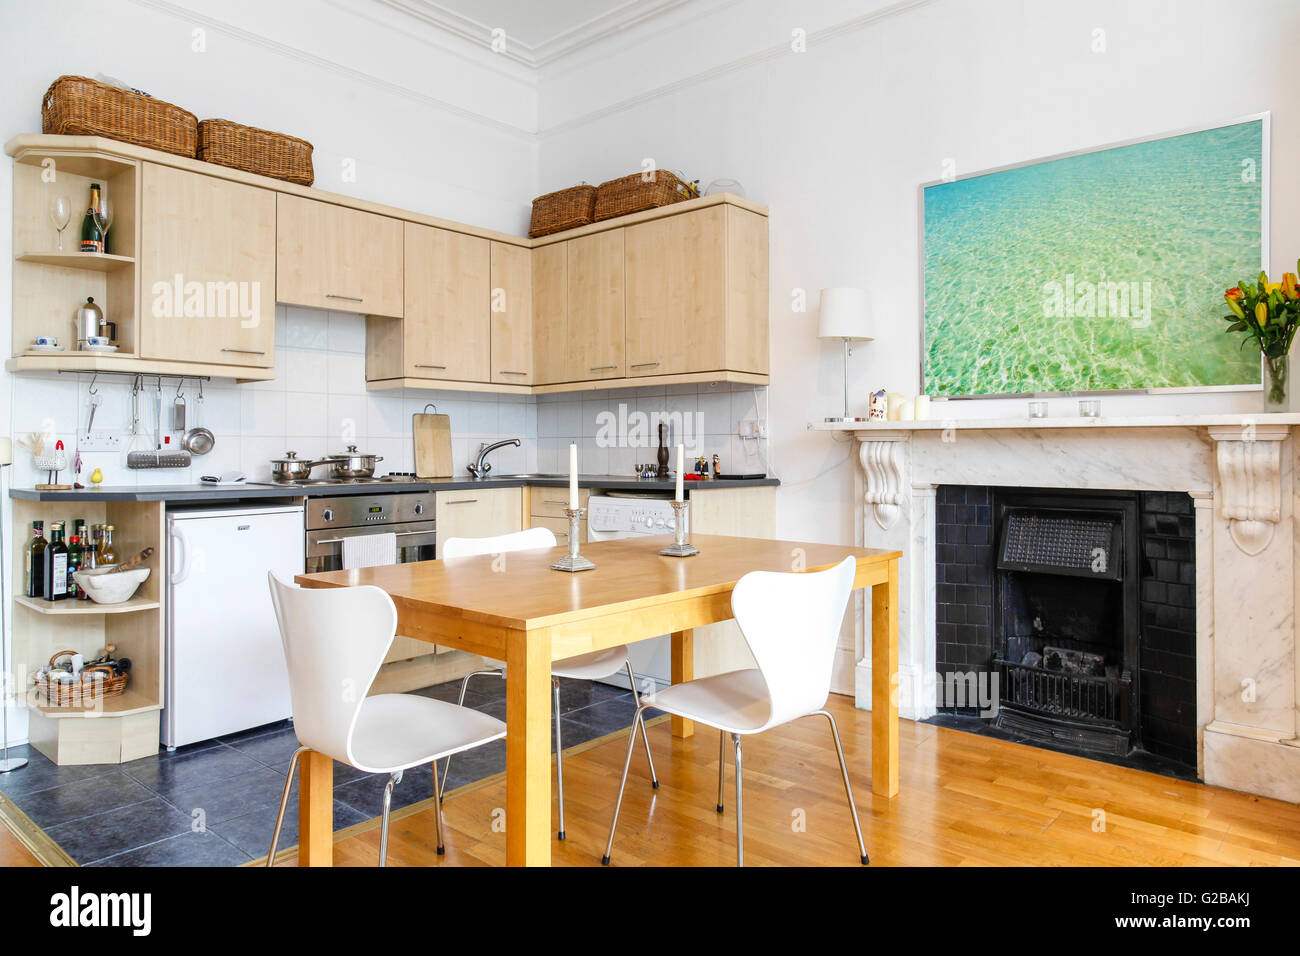 Pembridge Square, Notting Hill. View of a contemporary kitchen and dining area. Wood table and white chairs on top of wood floor. Picture hanging above fireplace. Stock Photo